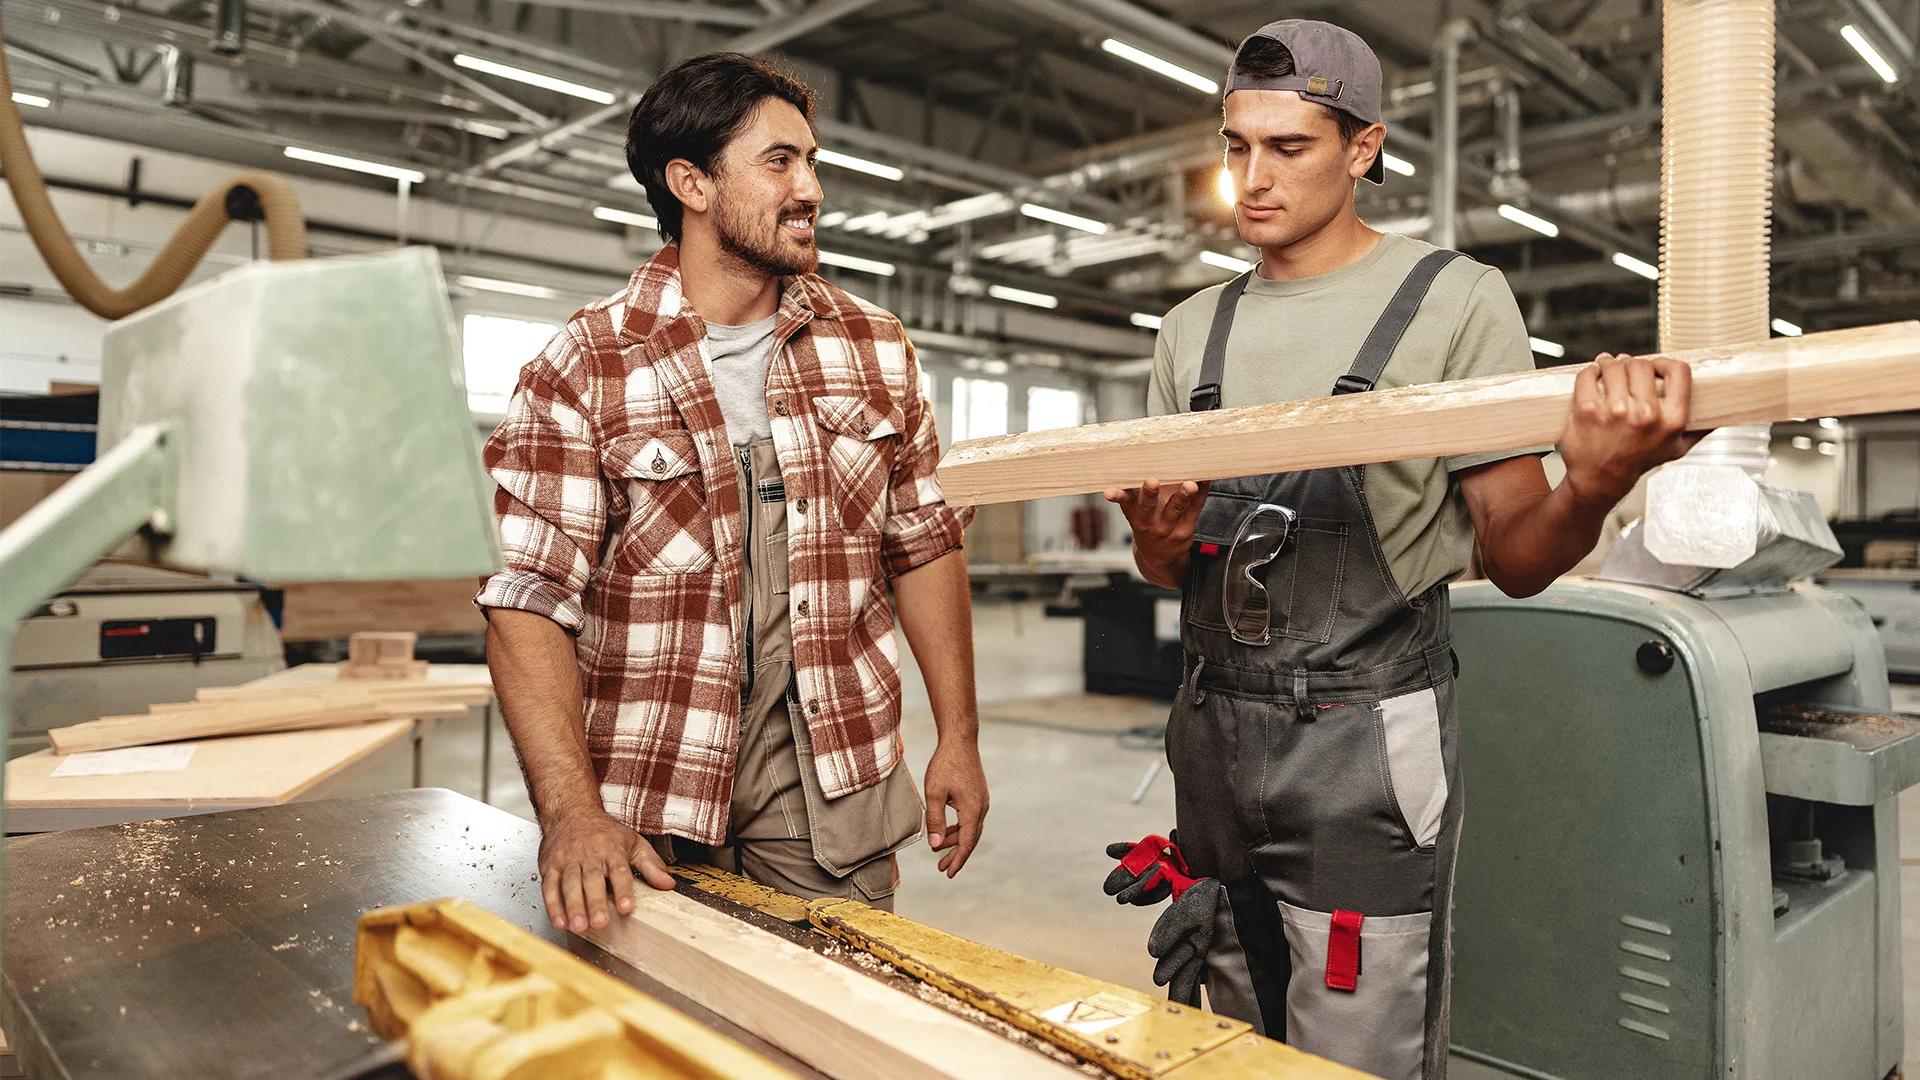 Carpentry and Structural Work: Know Your Limits